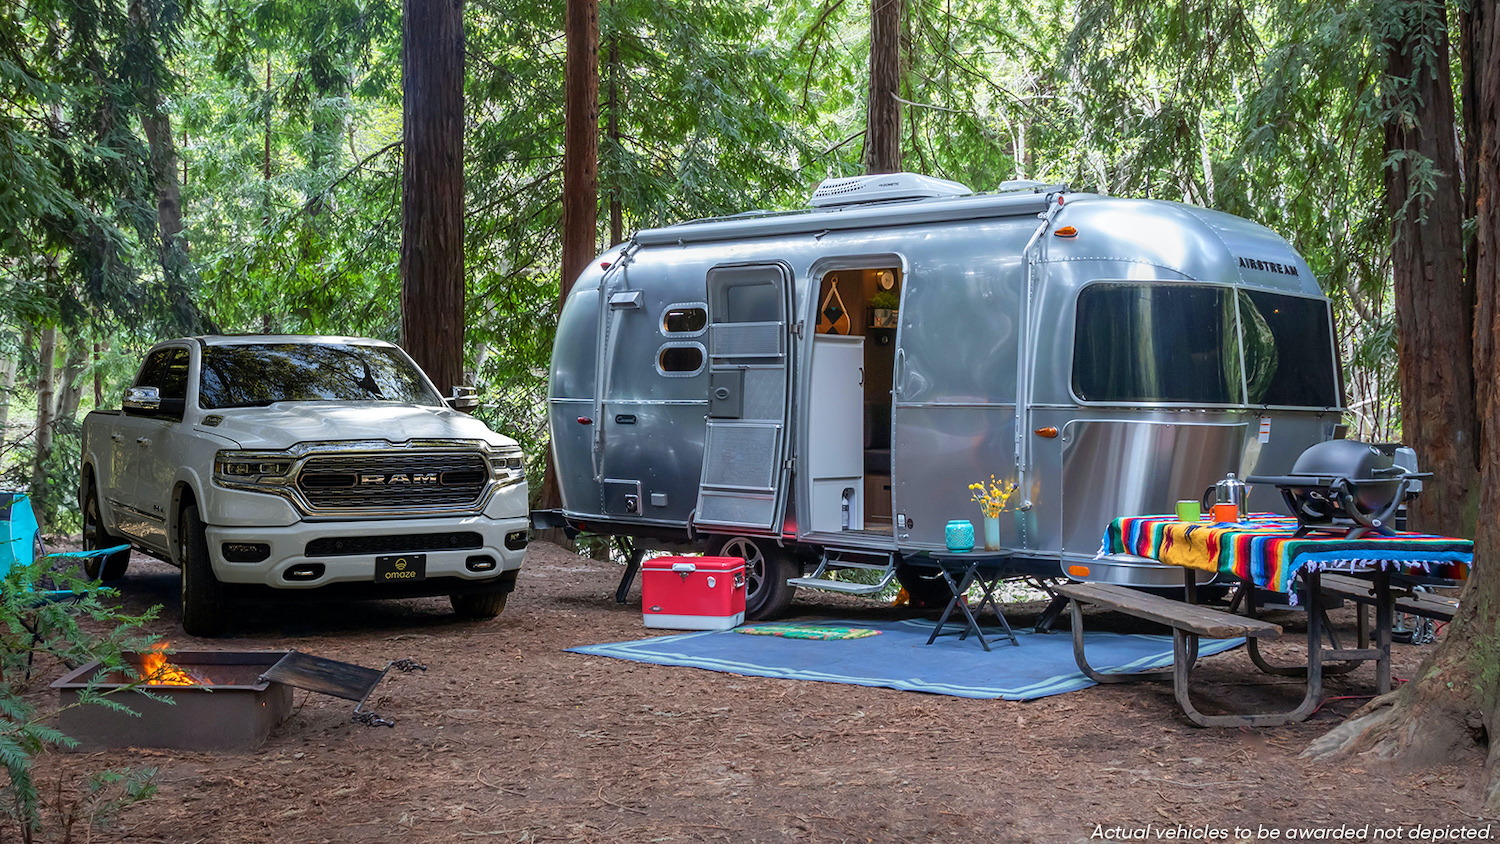 A Ram 1500 Limited pickup truck parked in the woods next to an Airstream Caravel 20FB, both of which Omaze is giving away